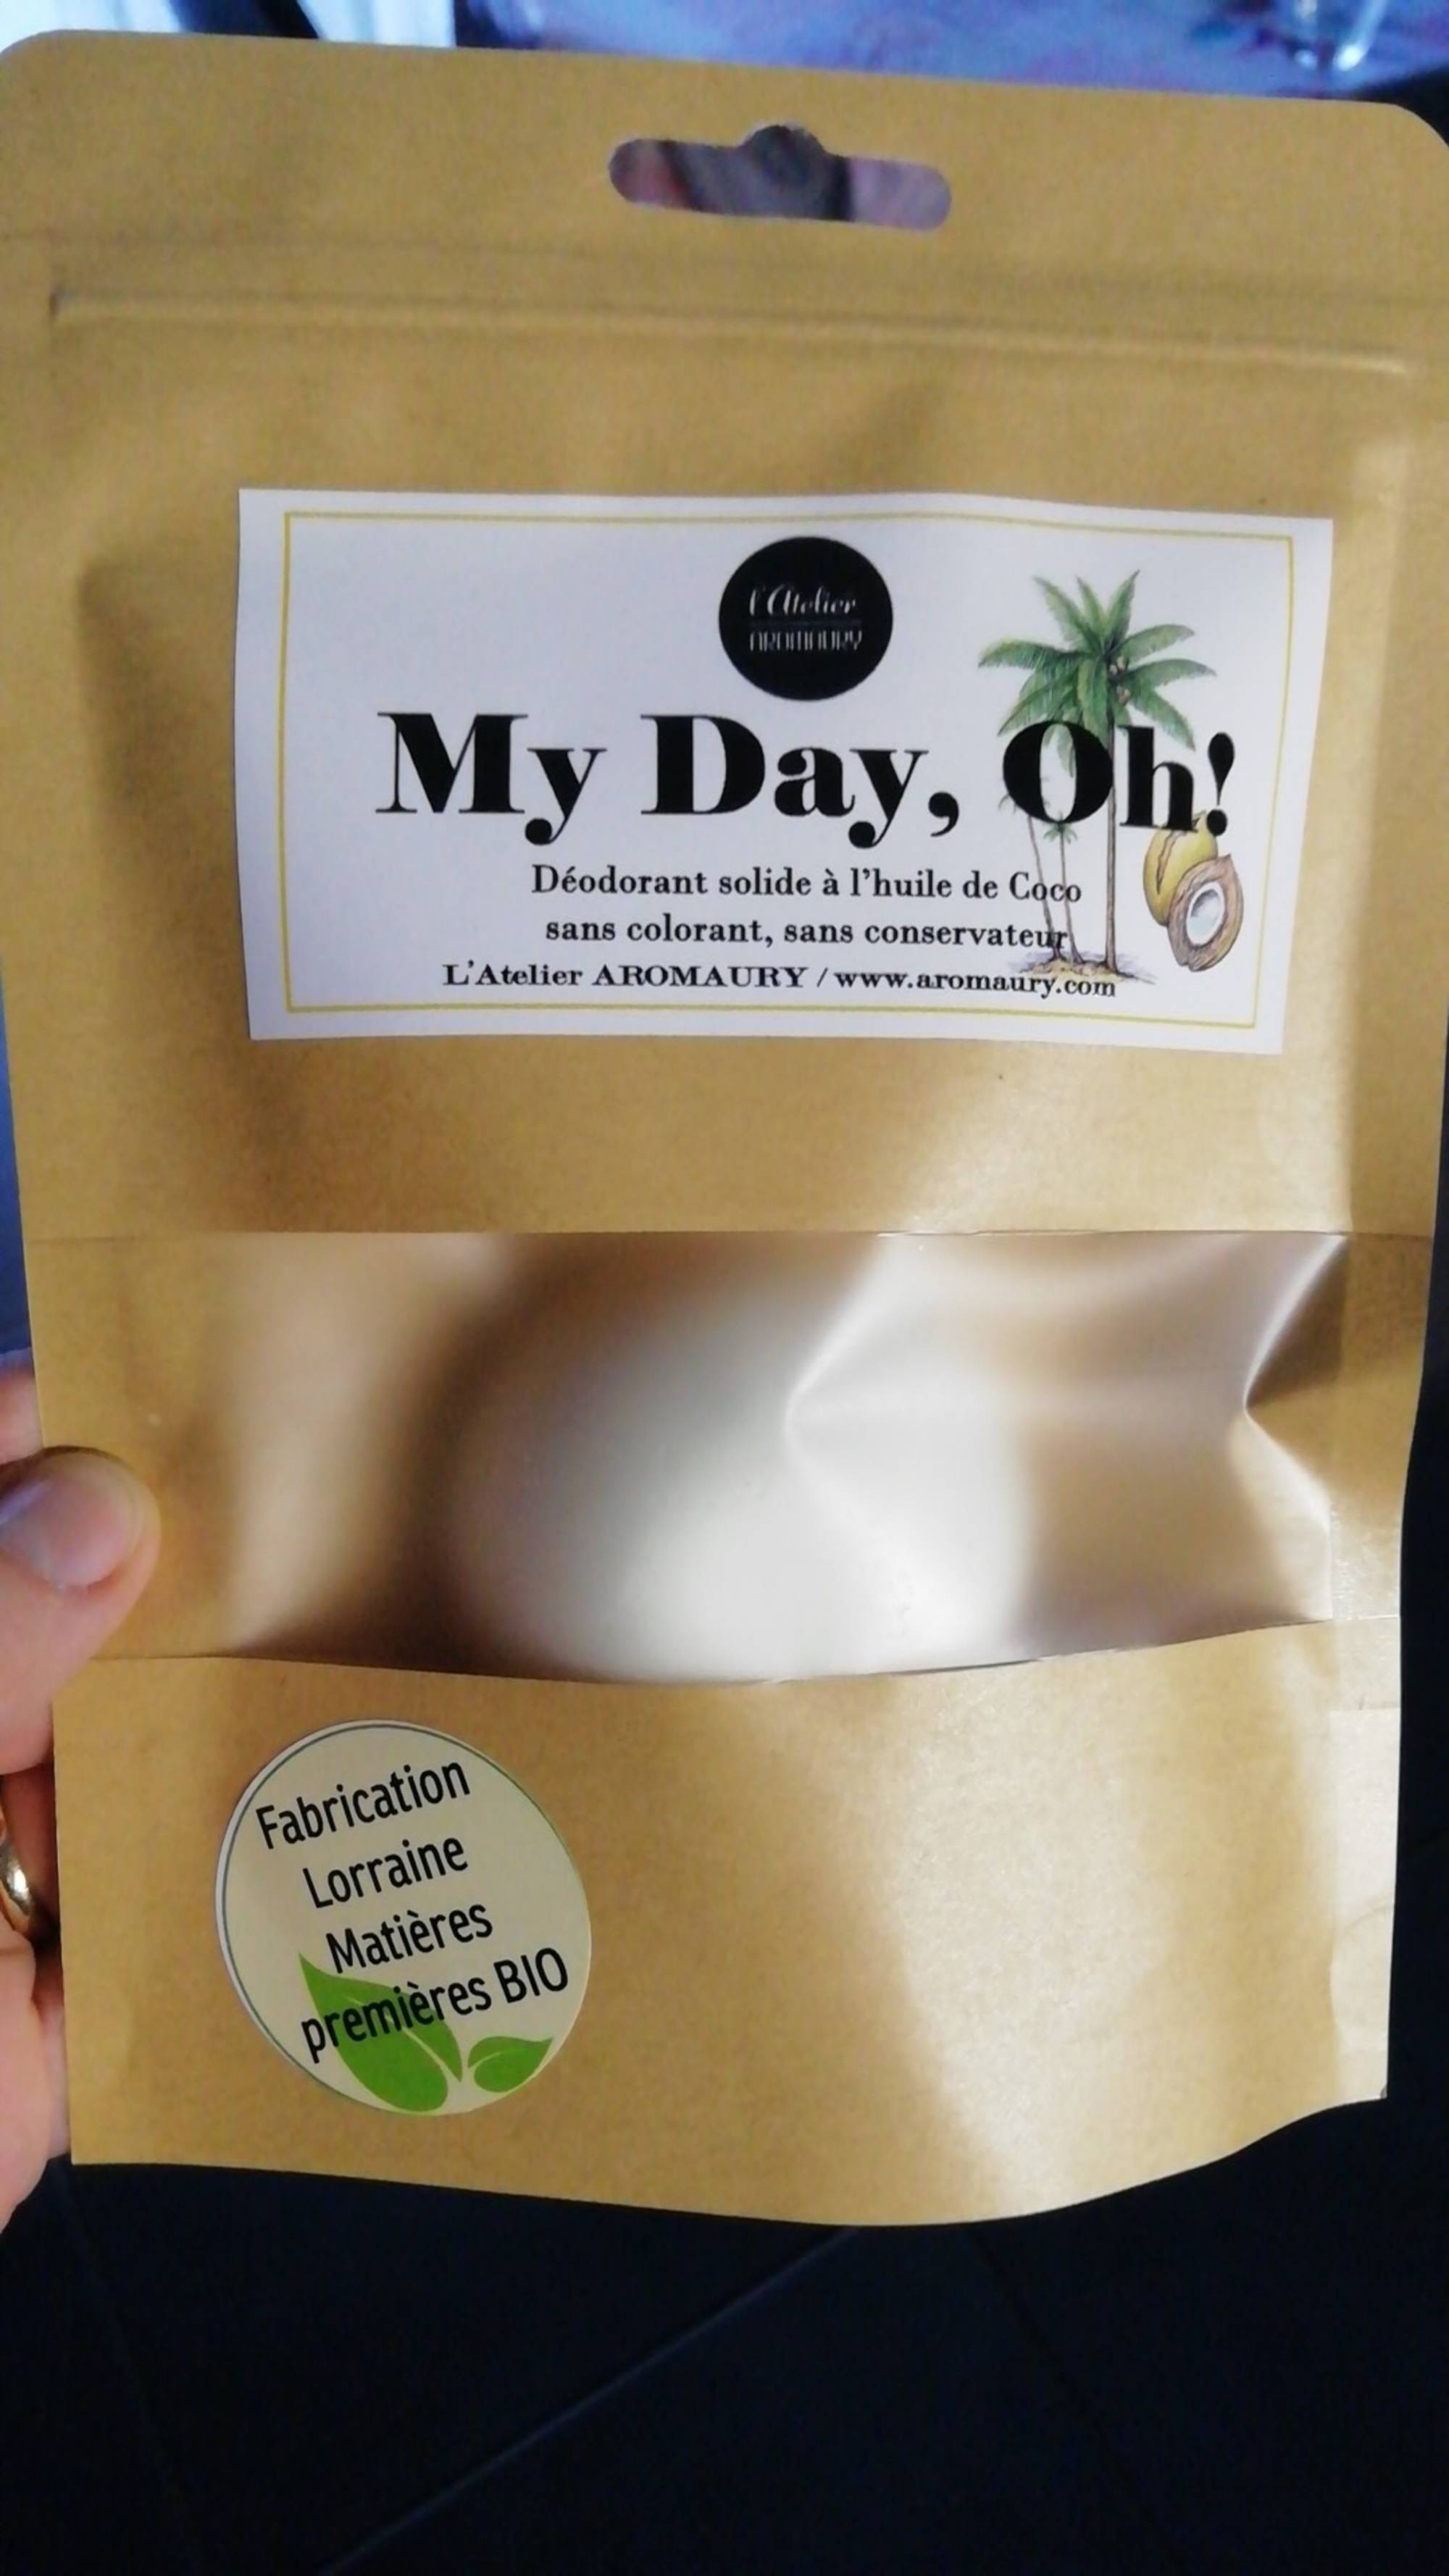 L'ATELIER AROMAURY - My day, oh! - Déodorant solide à l'huile de coco